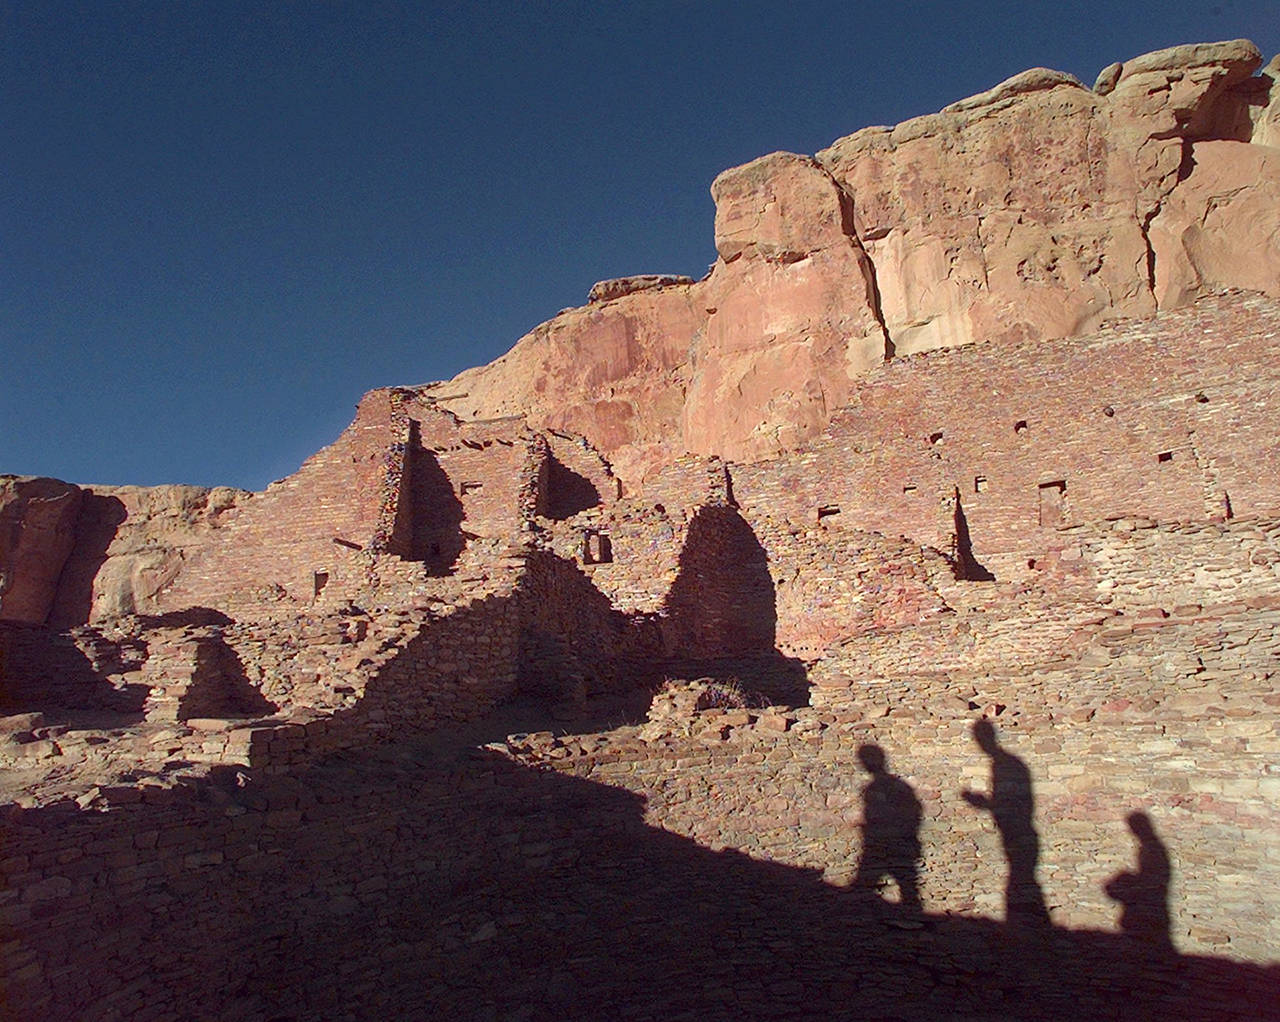 Tourists cast their shadows on the ancient Anasazi ruins of Chaco Canyon in New Mexico. Dozens of protests have been filed by tribal officials, environmentalists and others as federal land managers consider leasing parcels in northwestern New Mexico for oil and gas development that critics say are too close to sites they consider culturally significant. (AP Photo/Eric Draper, File)